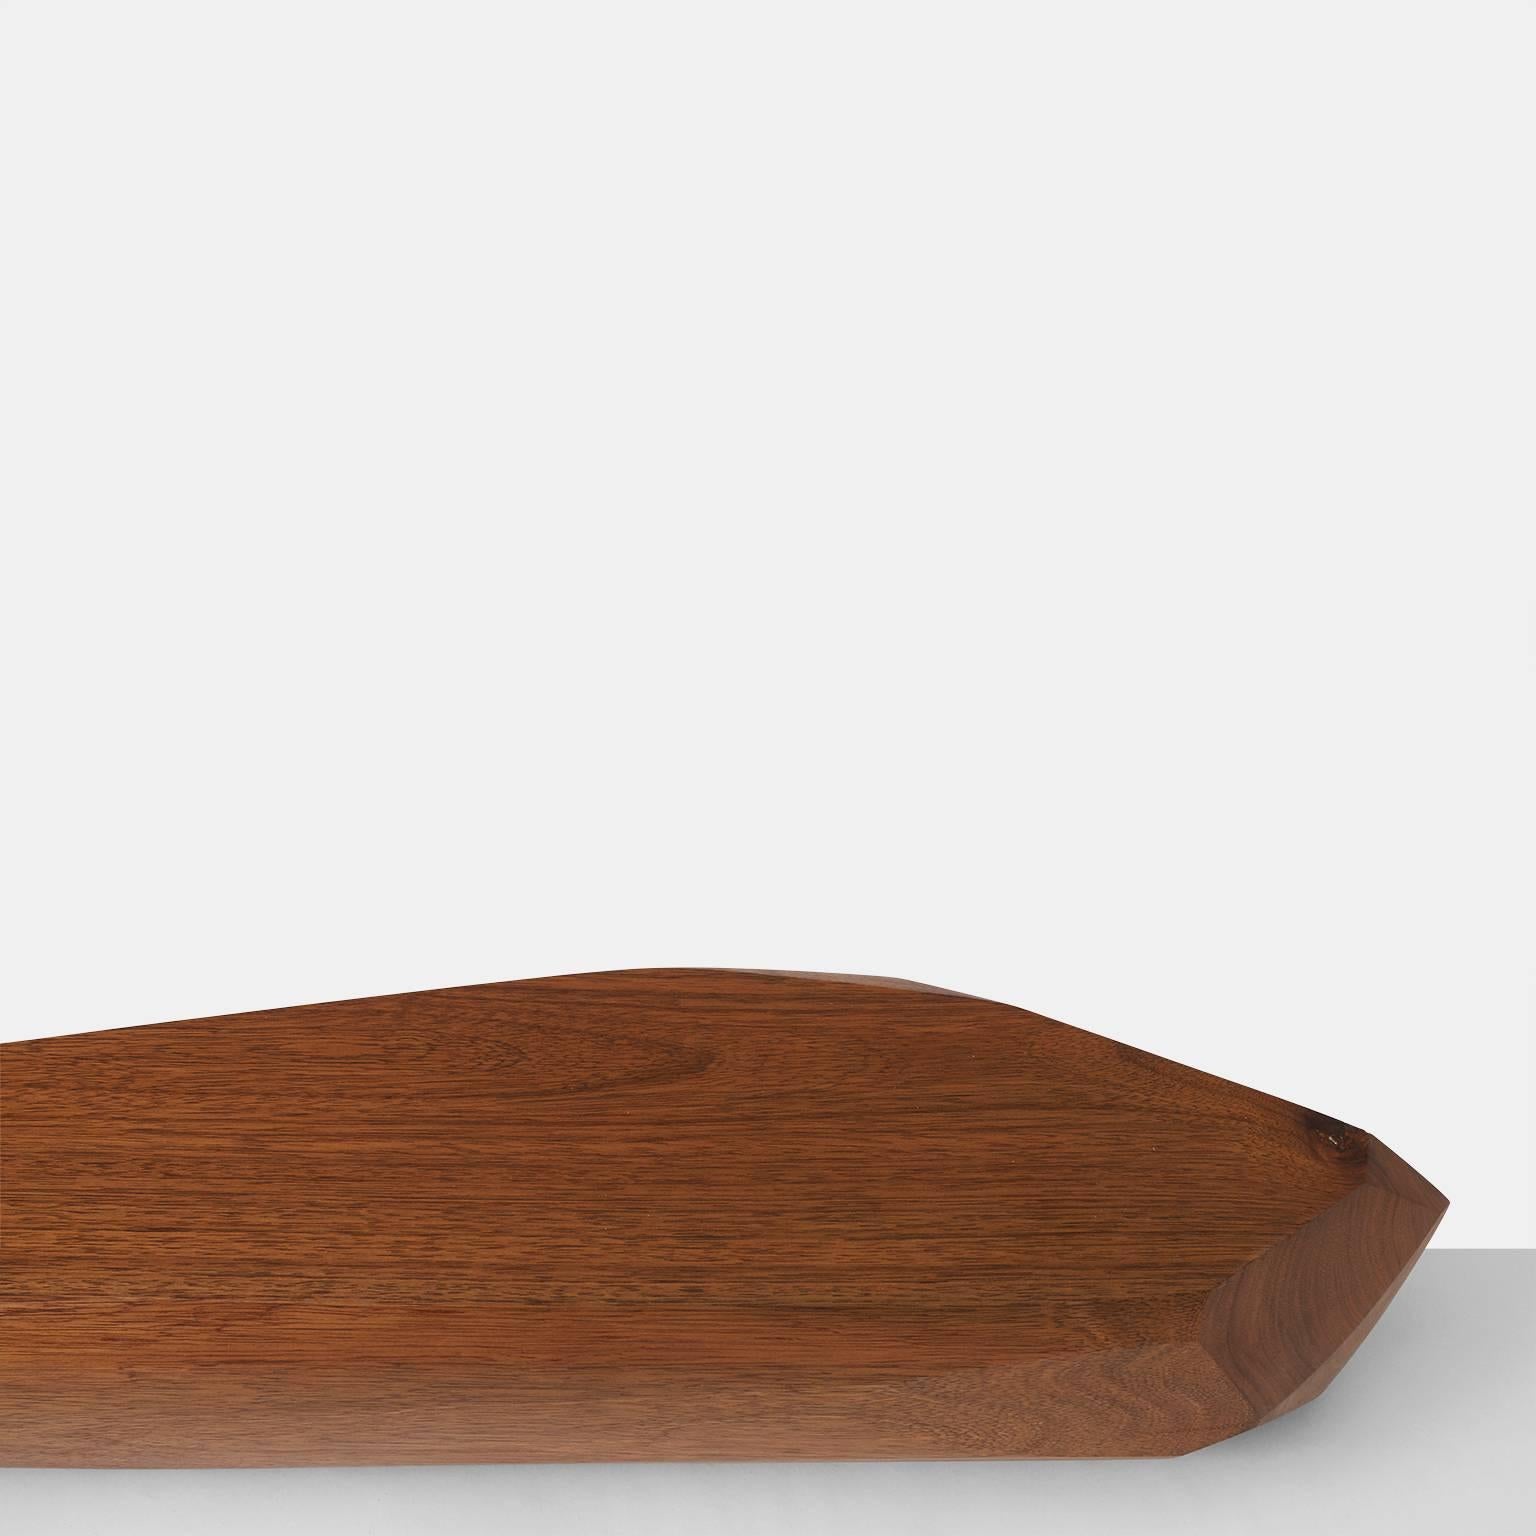 Gamble Stone Coffee Table by Kaspar Hamacher In Good Condition For Sale In San Francisco, CA